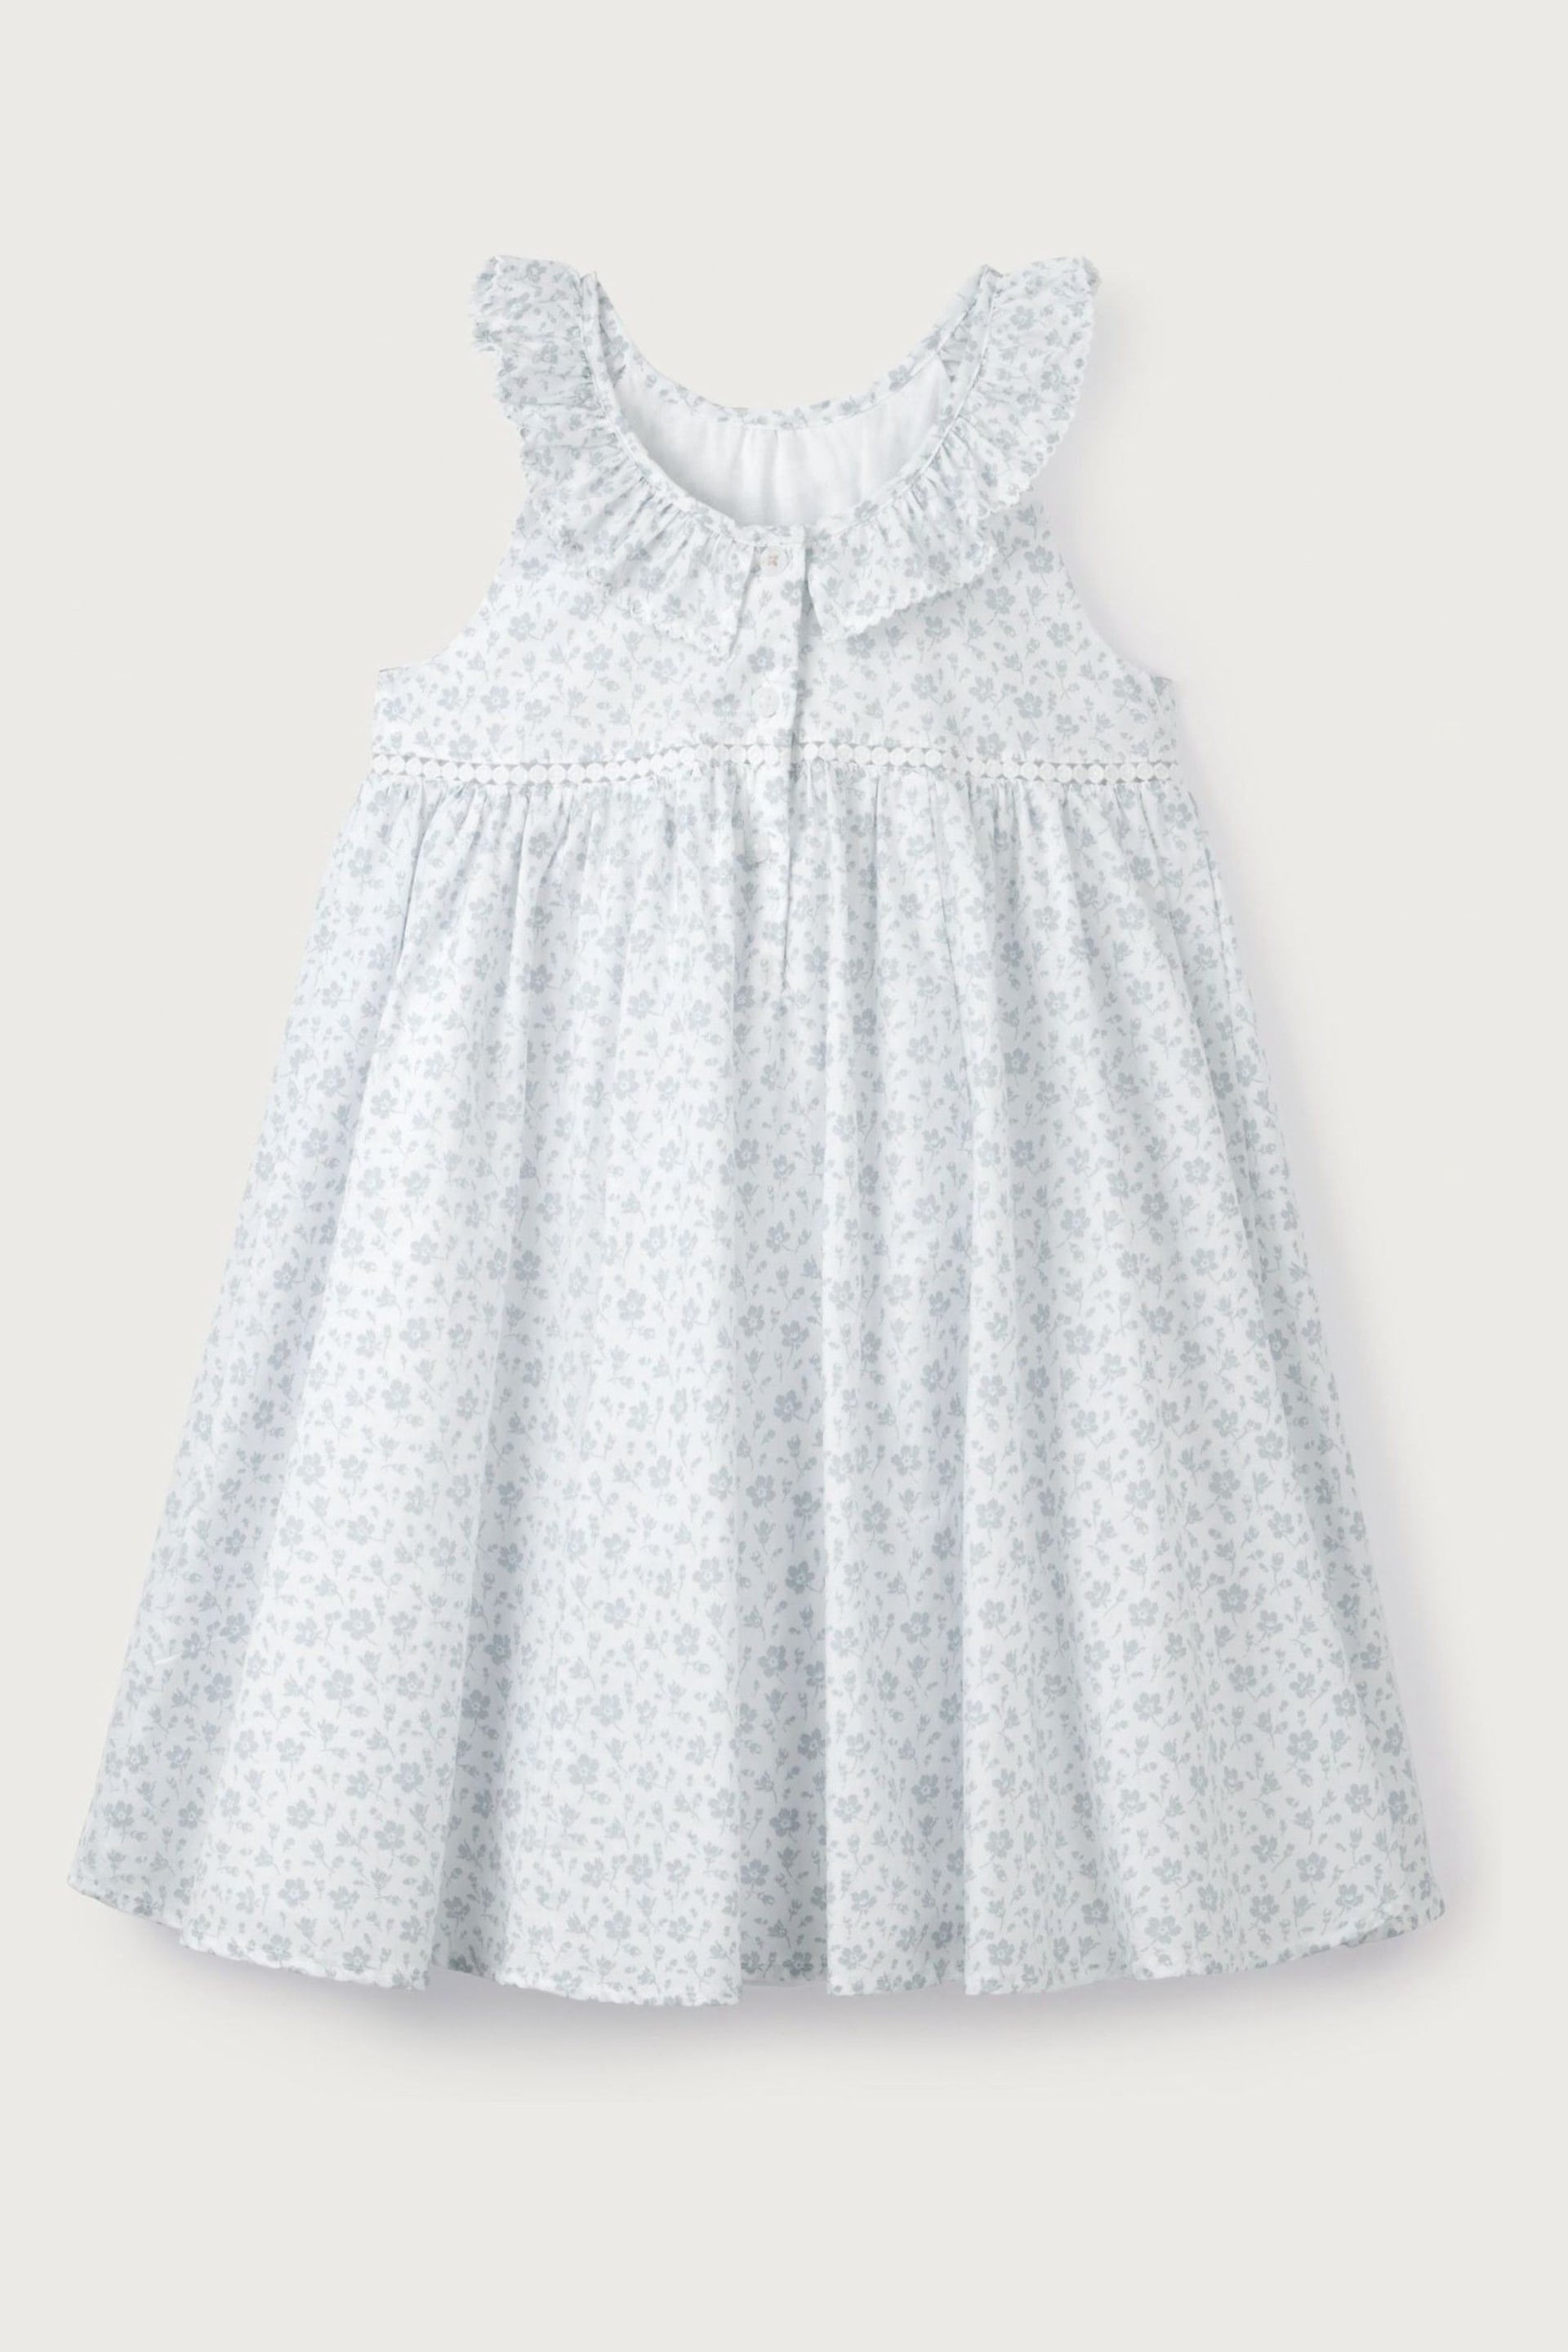 The White Company Blue Margot Floral Cotton Swing Dress - Image 9 of 12